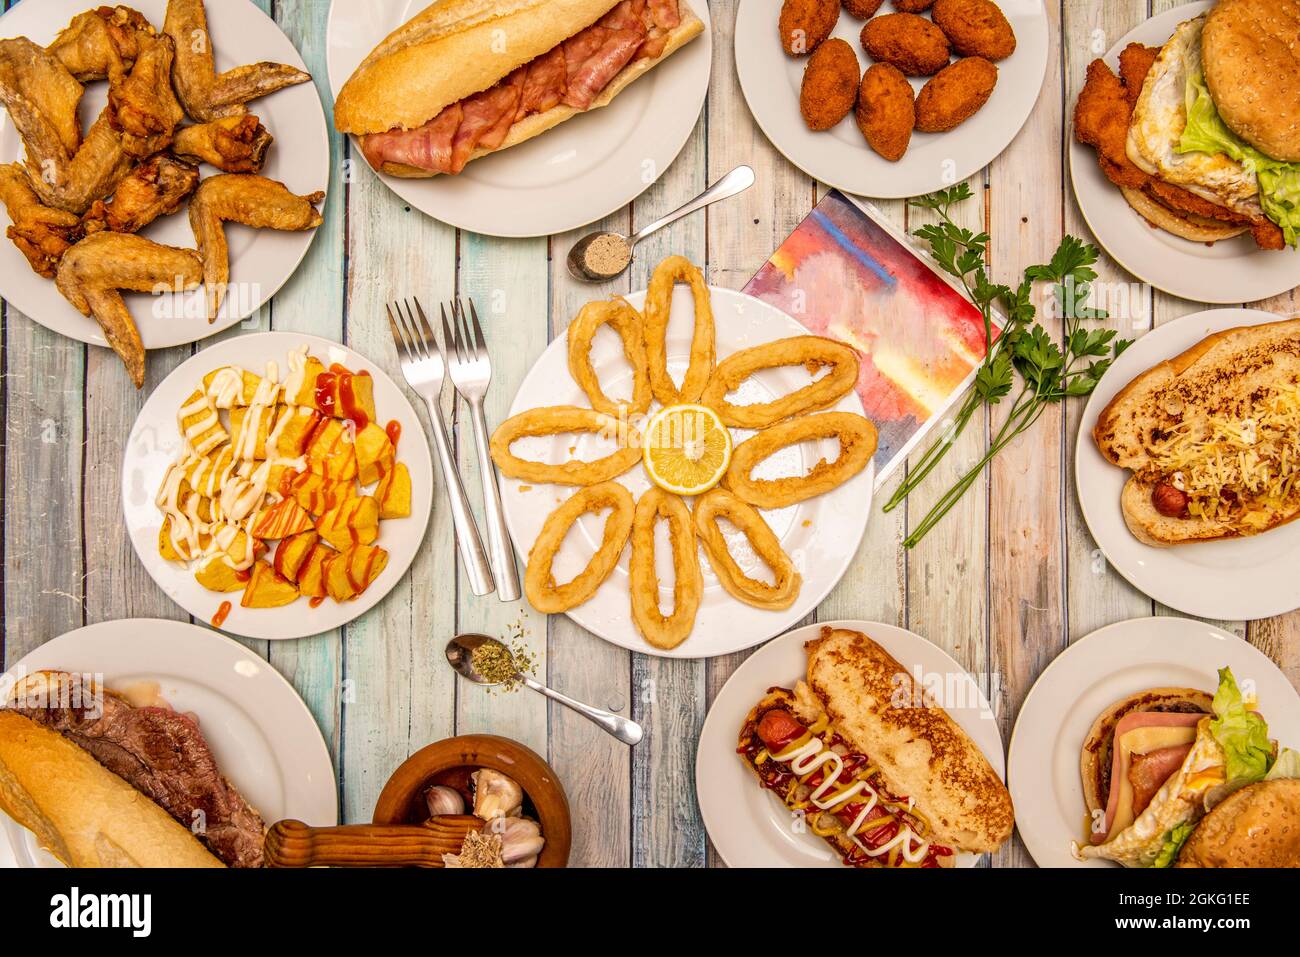 set of typical food dishes served in Spanish taverns. Squid a la romana, patatas bravas, fried wings, bacon sandwich, homemade croquettes Stock Photo